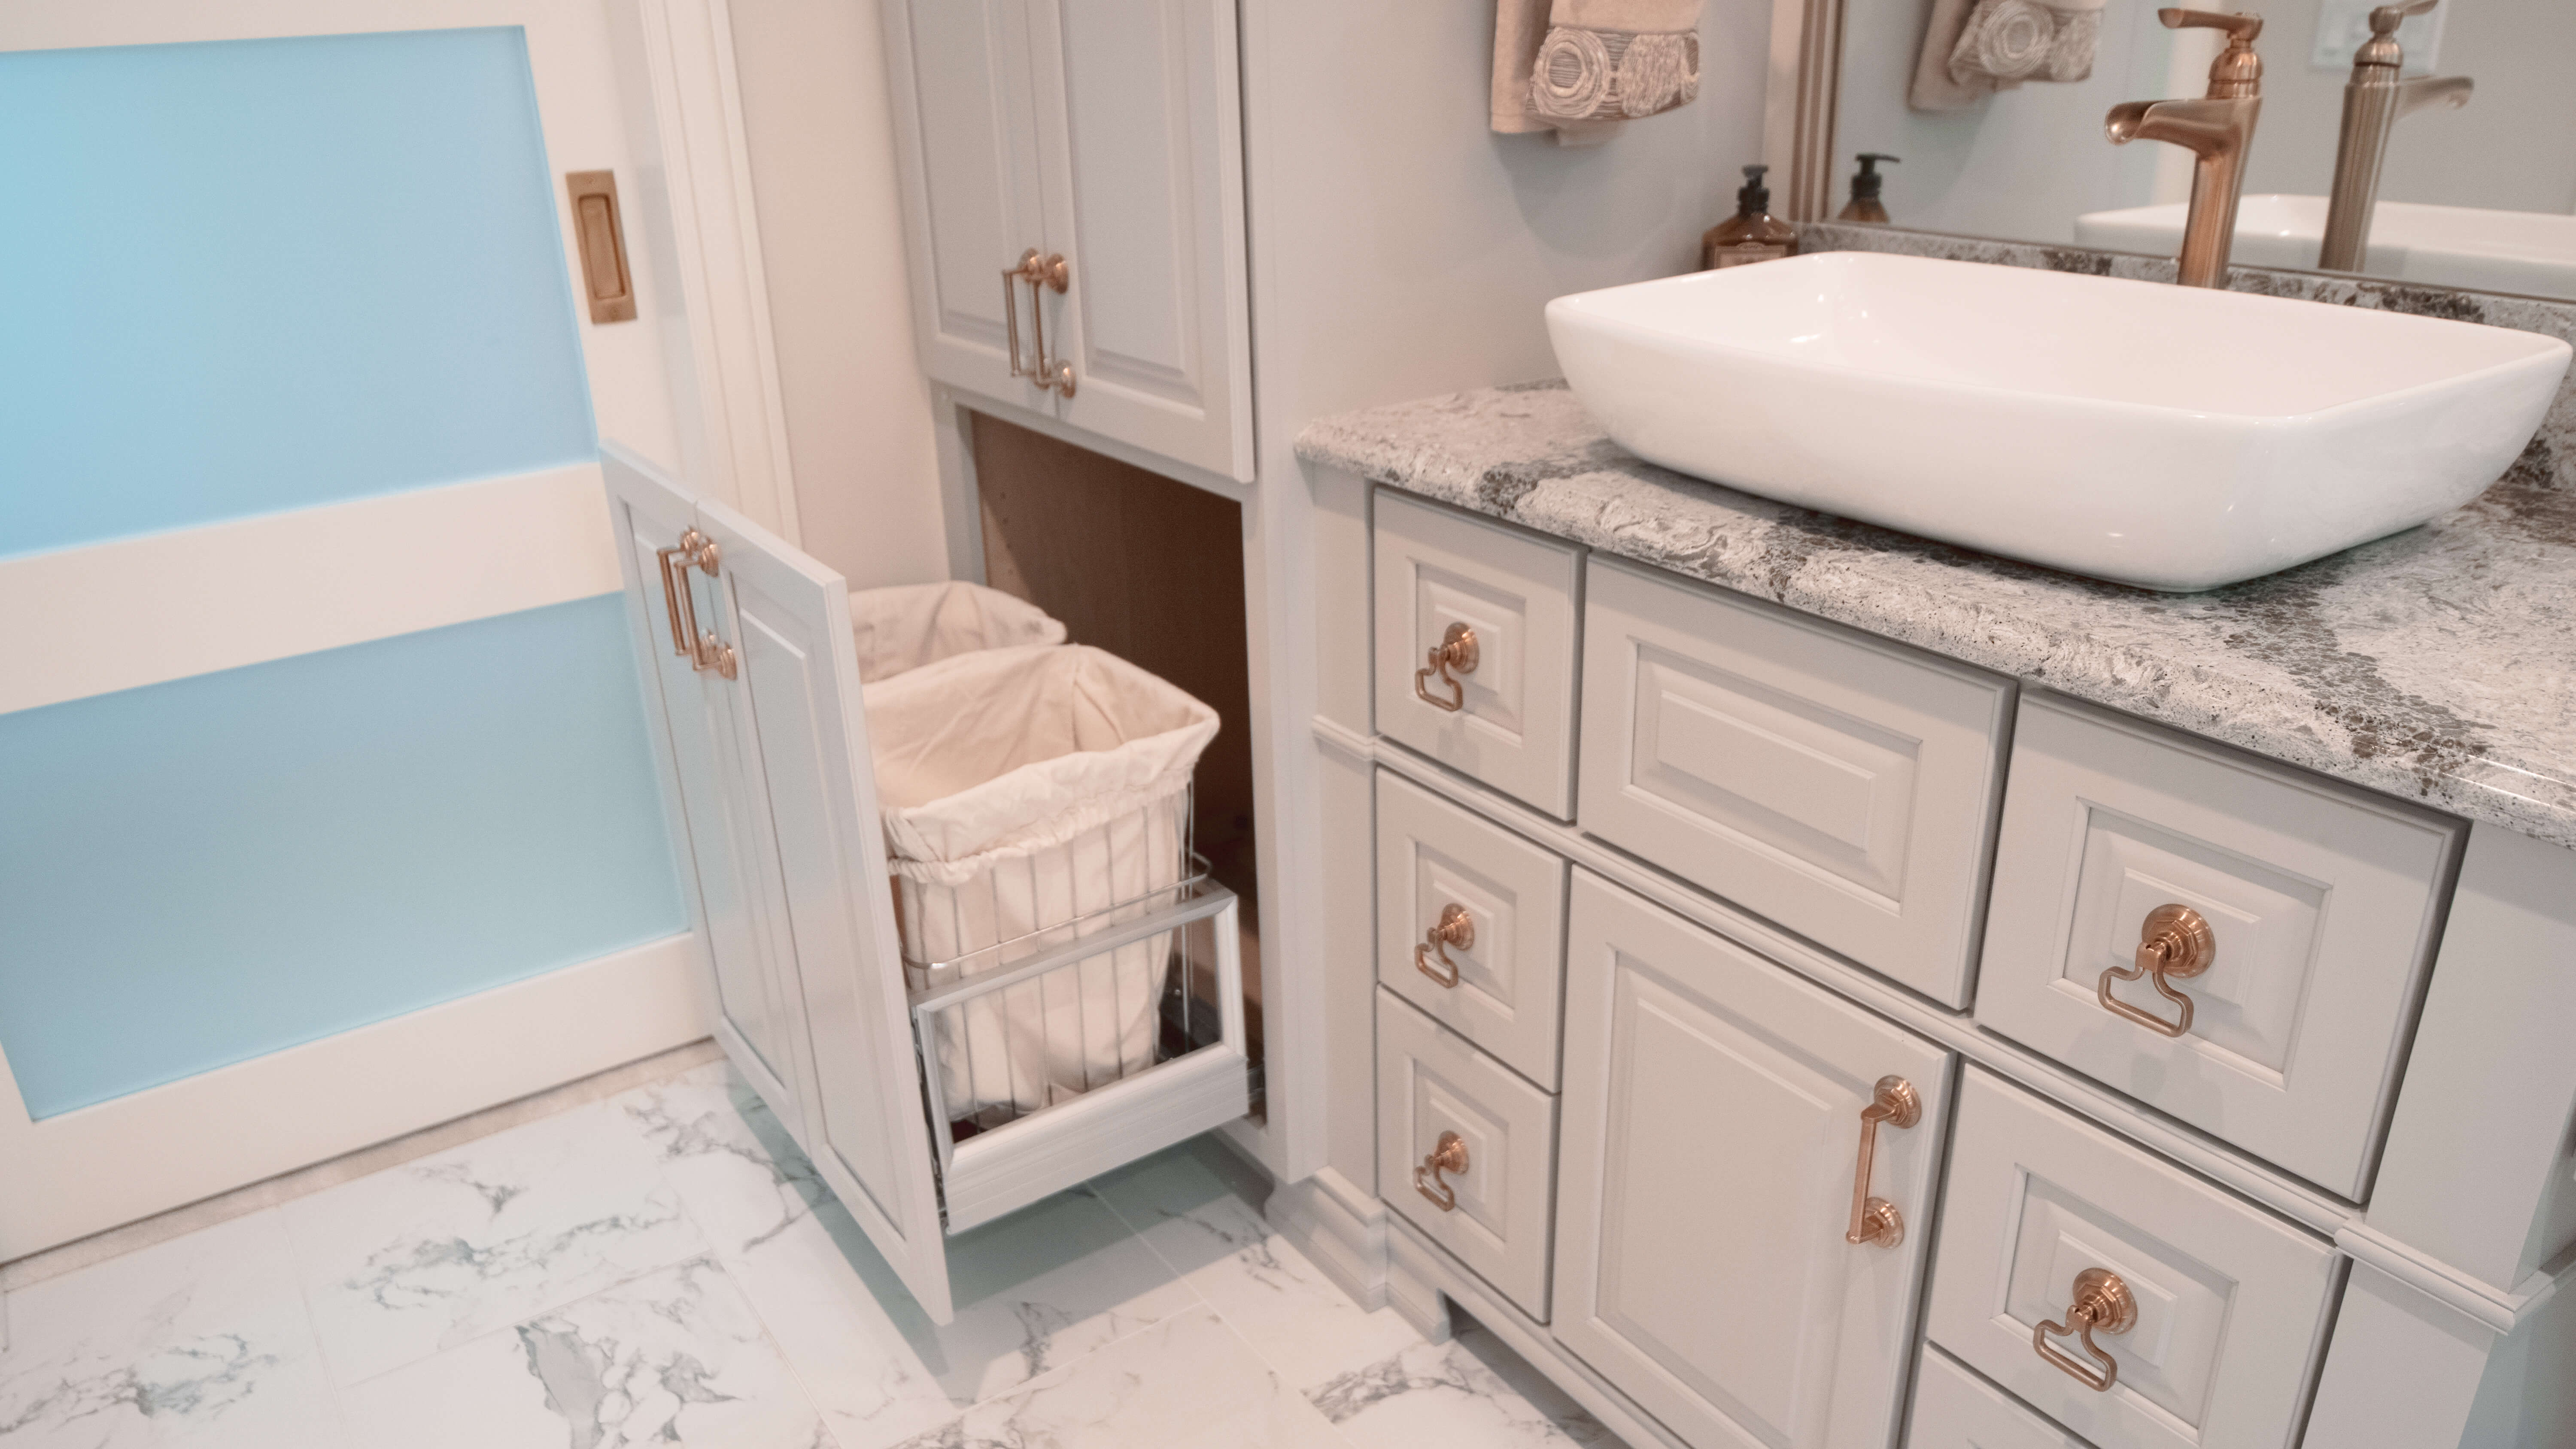 A pull-out hamper cabinet in a painted vanity.